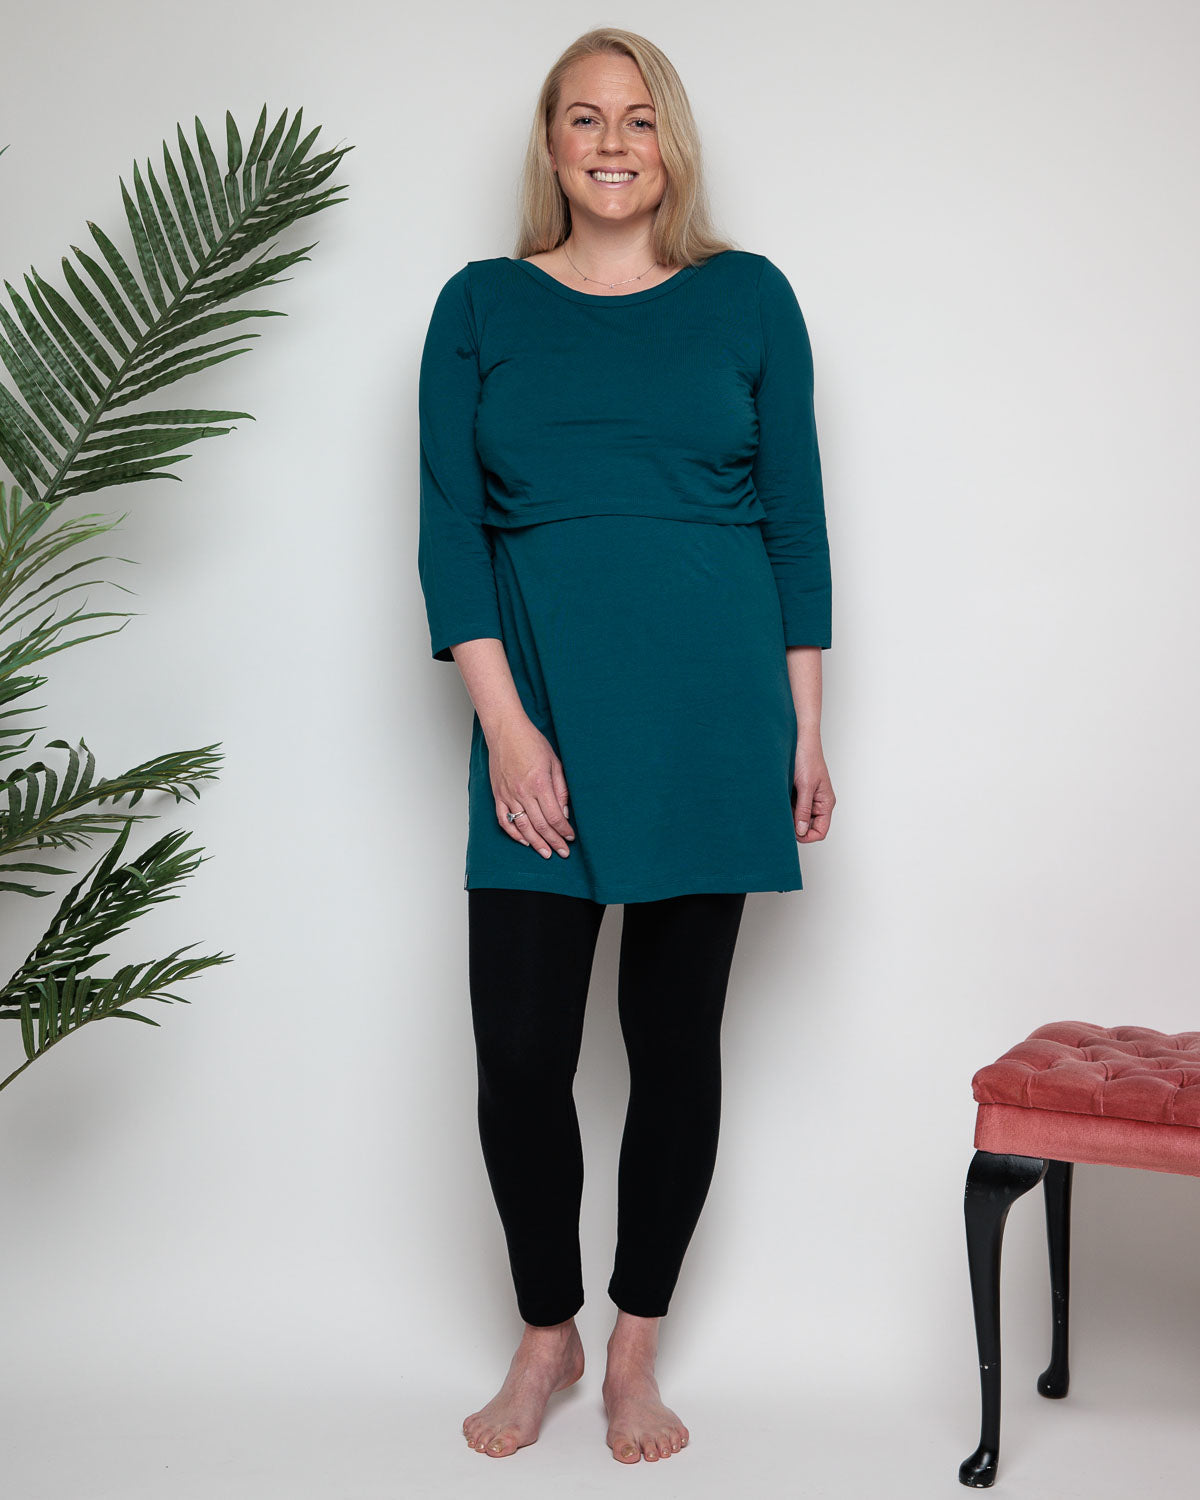 Nursing and Maternity Dress in Tidal Teal Recycled Cotton